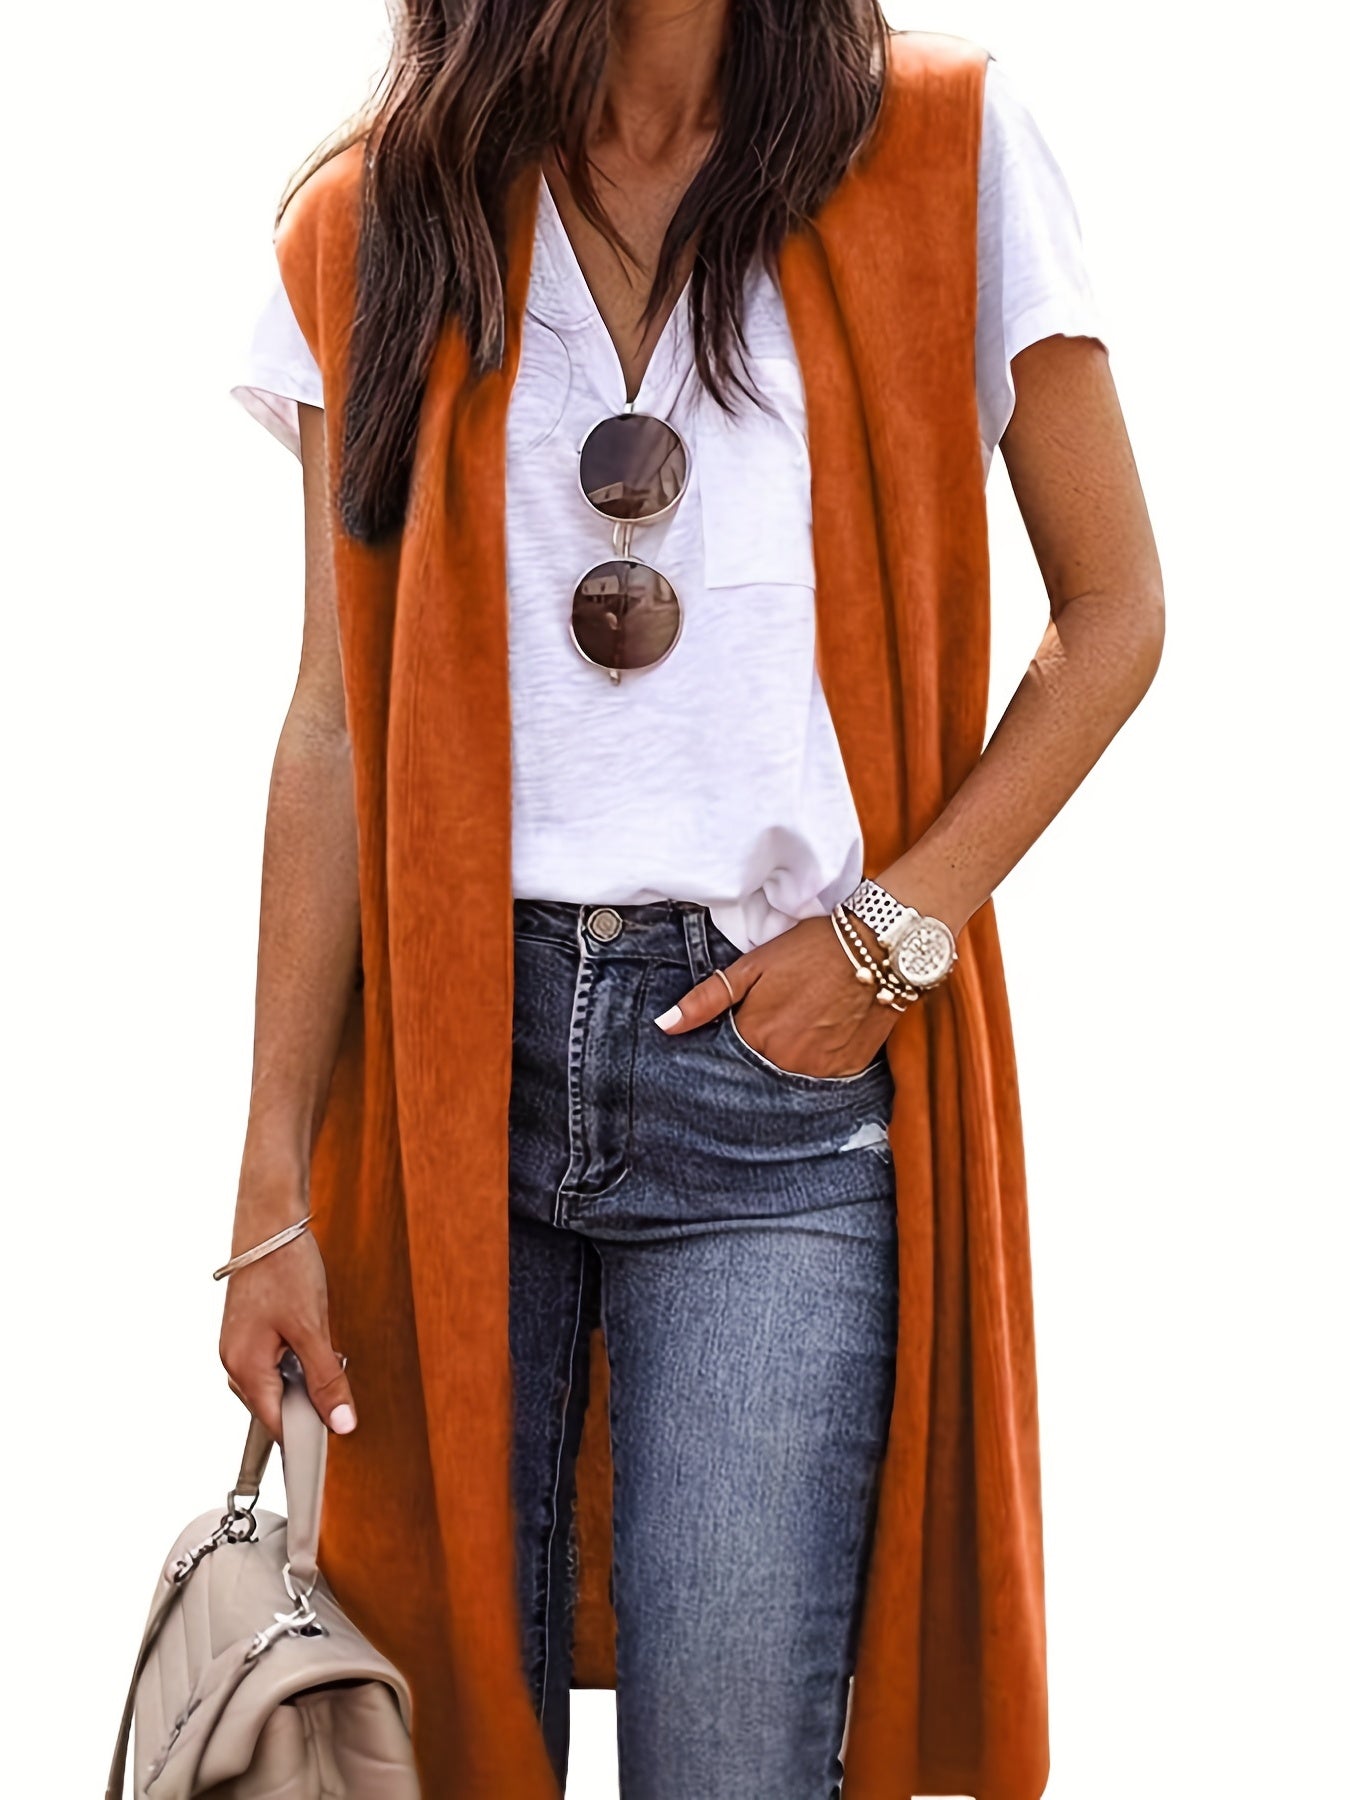 Antmvs Solid Sleeveless Knit Cardigan, Casual Simple Long Length Vest Sweater, Women's Clothing